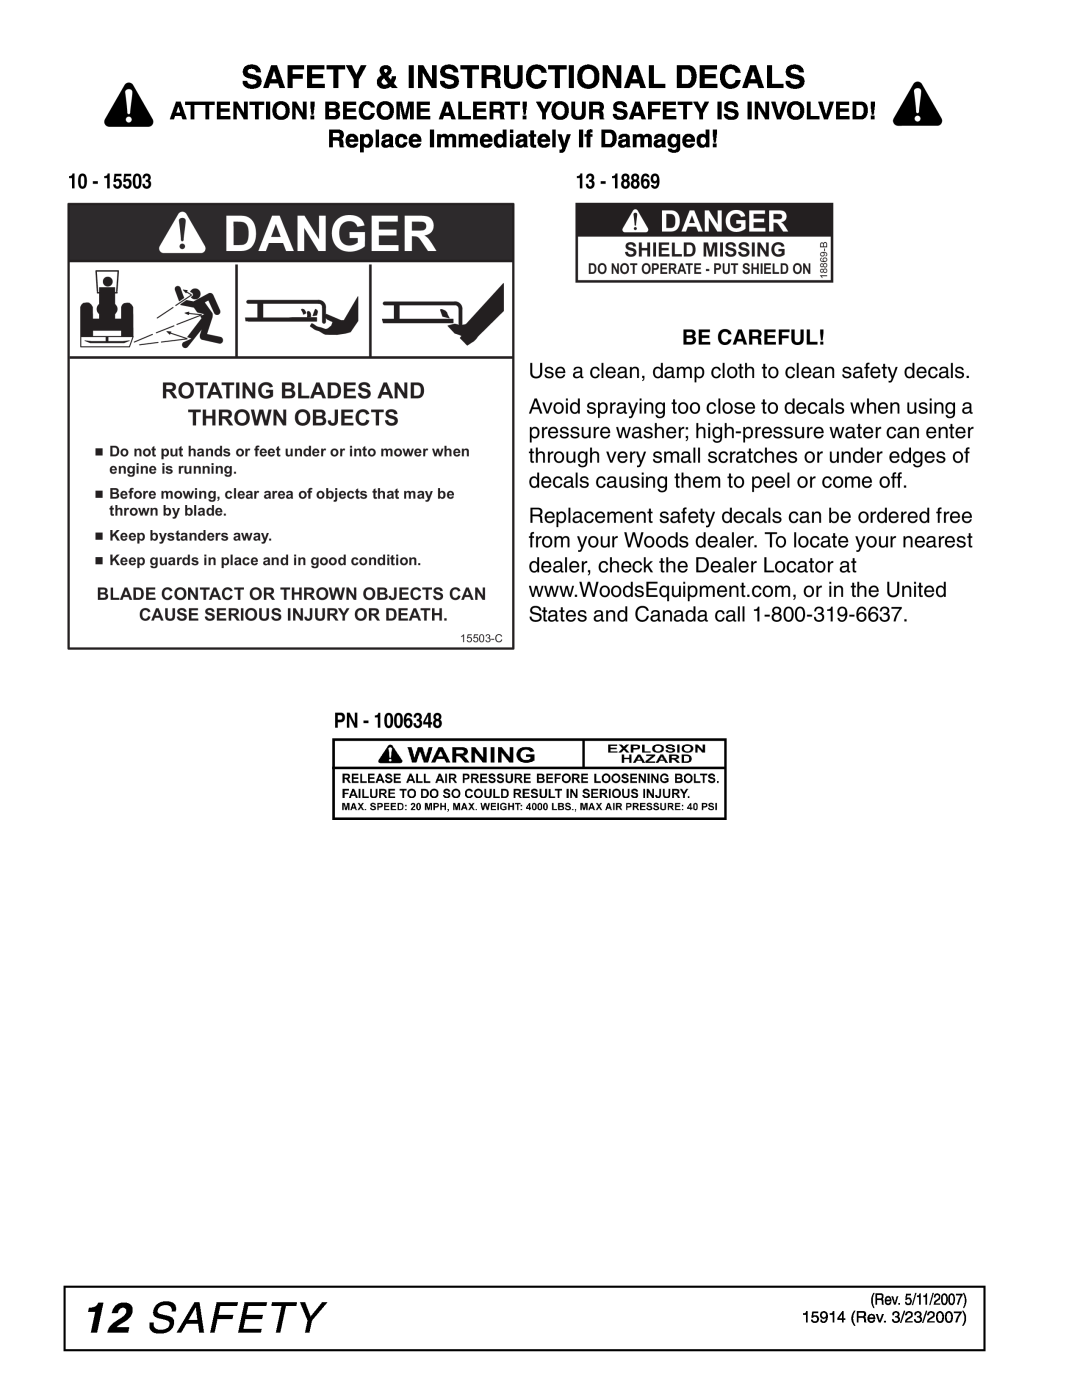 Woods Equipment MD80-2 12SAFETY, Danger, Safety & Instructional Decals, Attention! Become Alert! Your Safety Is Involved 